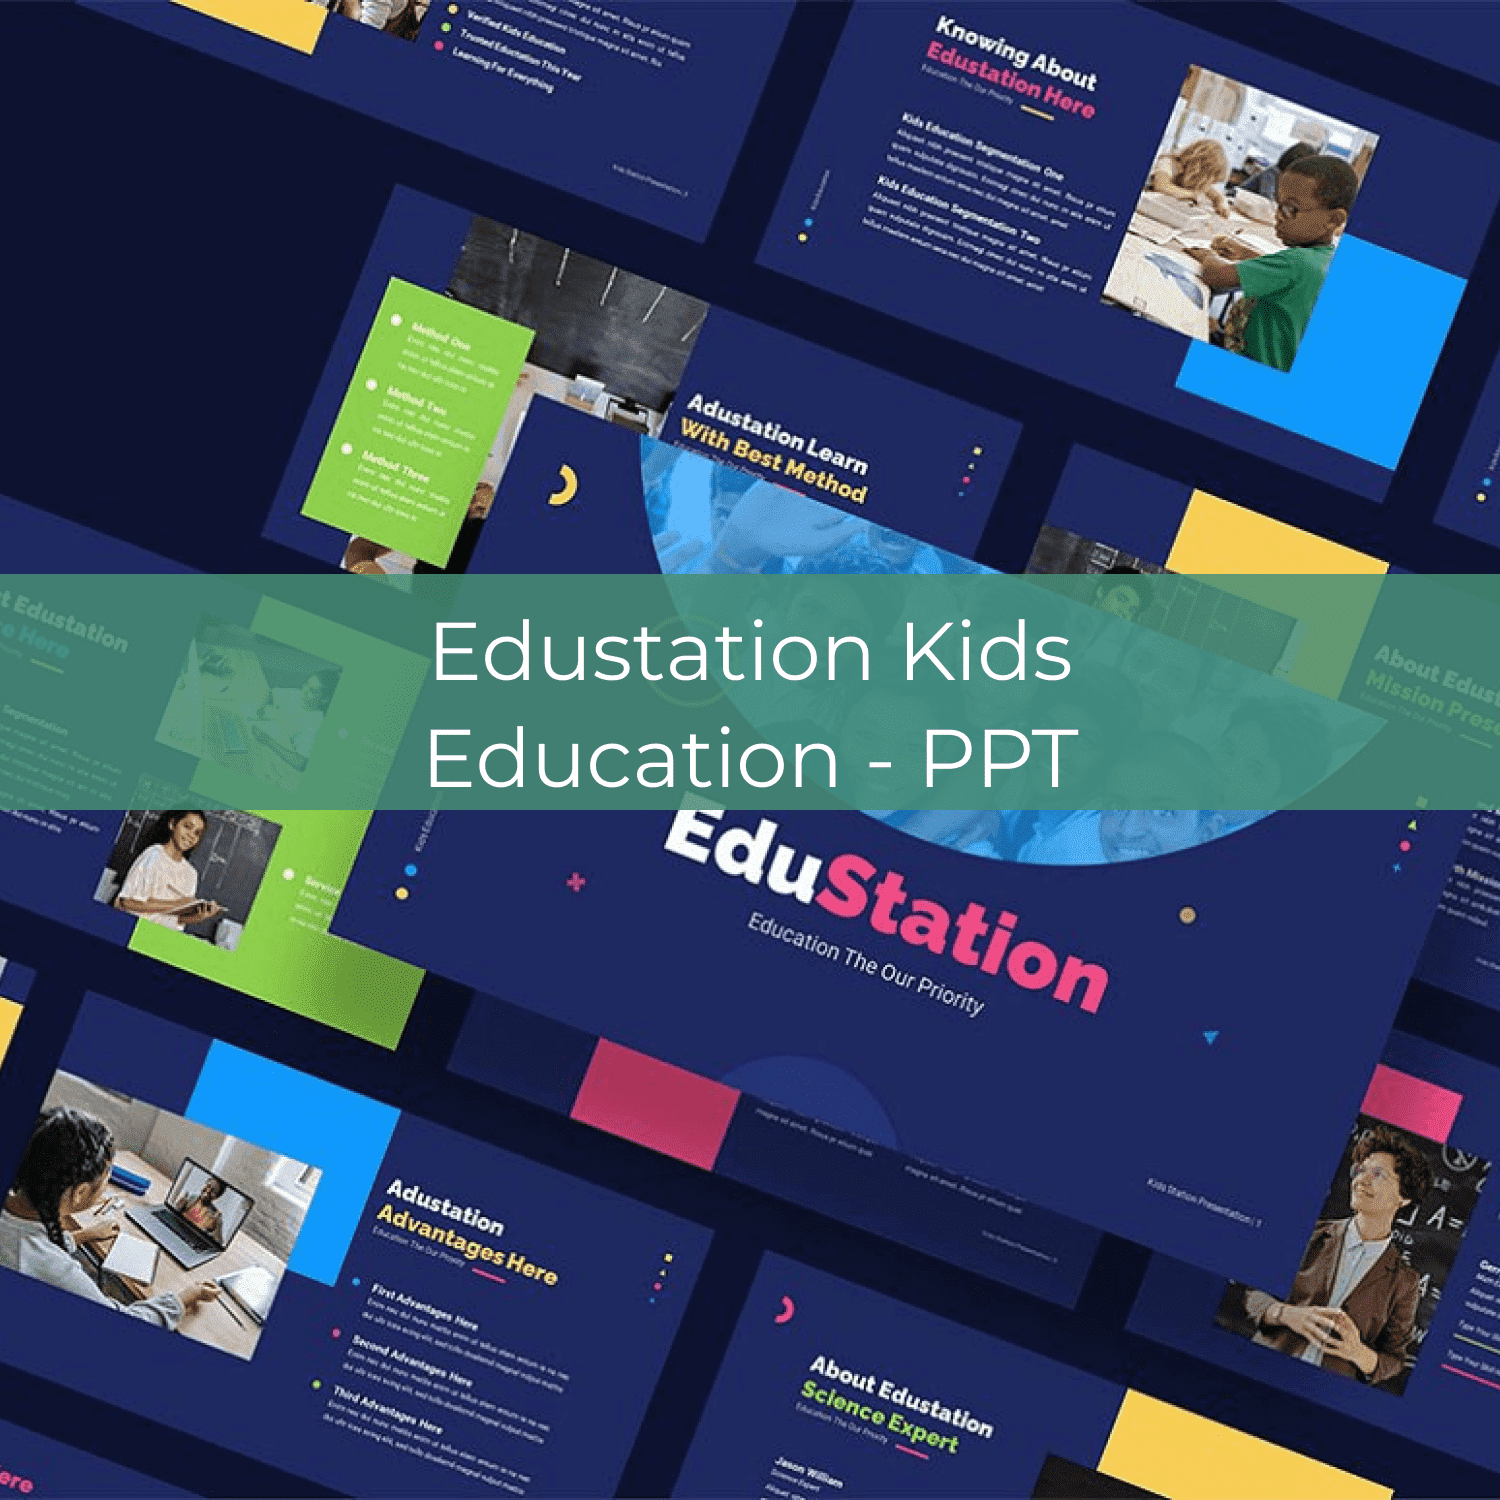 Edustation Kids Education - PPT - "Education The Our Priority".